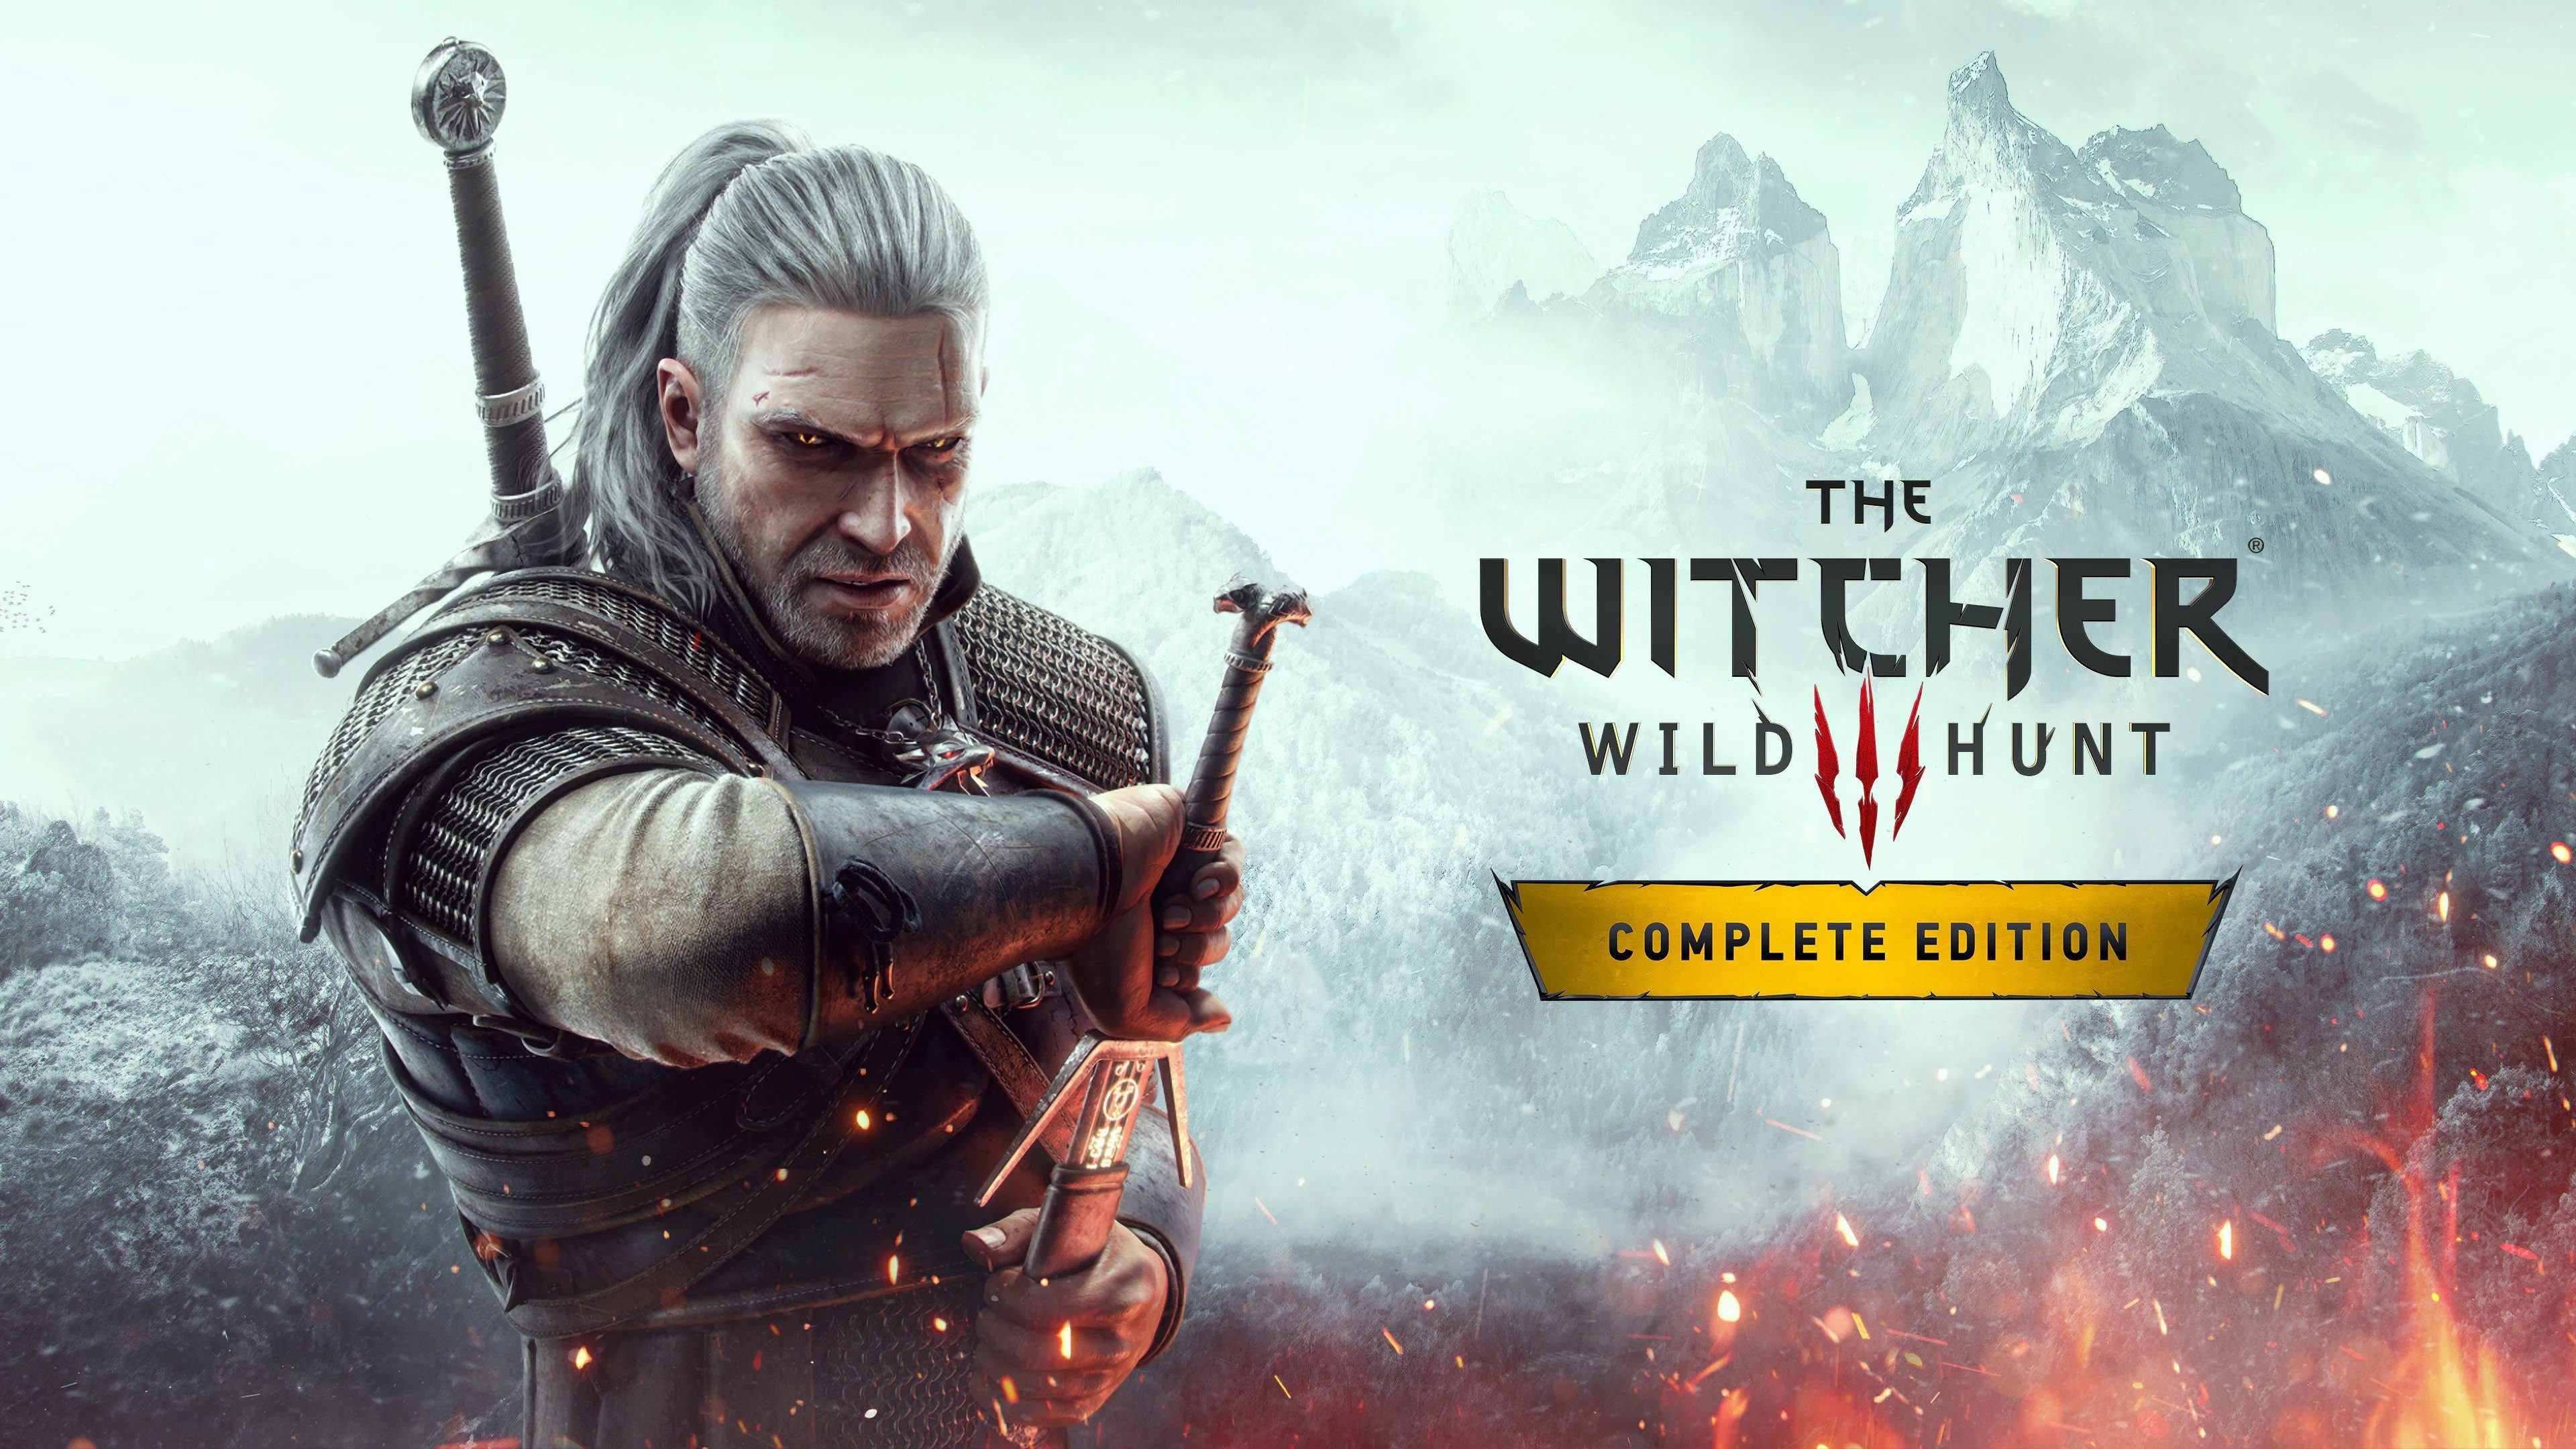 Review - The Witcher 3: Wild Hunt - Complete Edition (Xbox Series S/X)